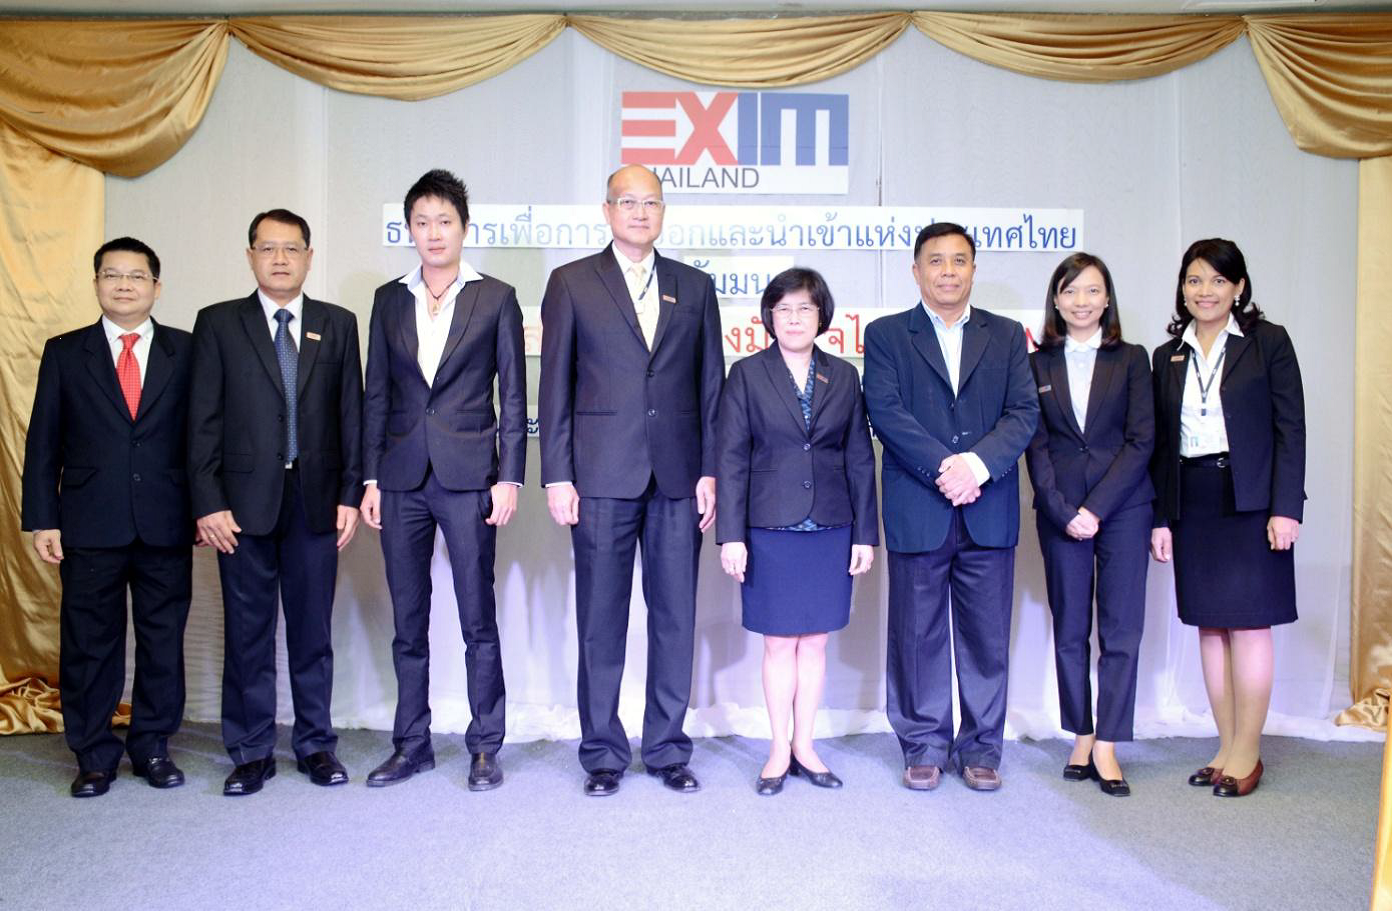 EXIM Thailand Holds Seminar to Promote International Market Expansion by Thai SME Exporters